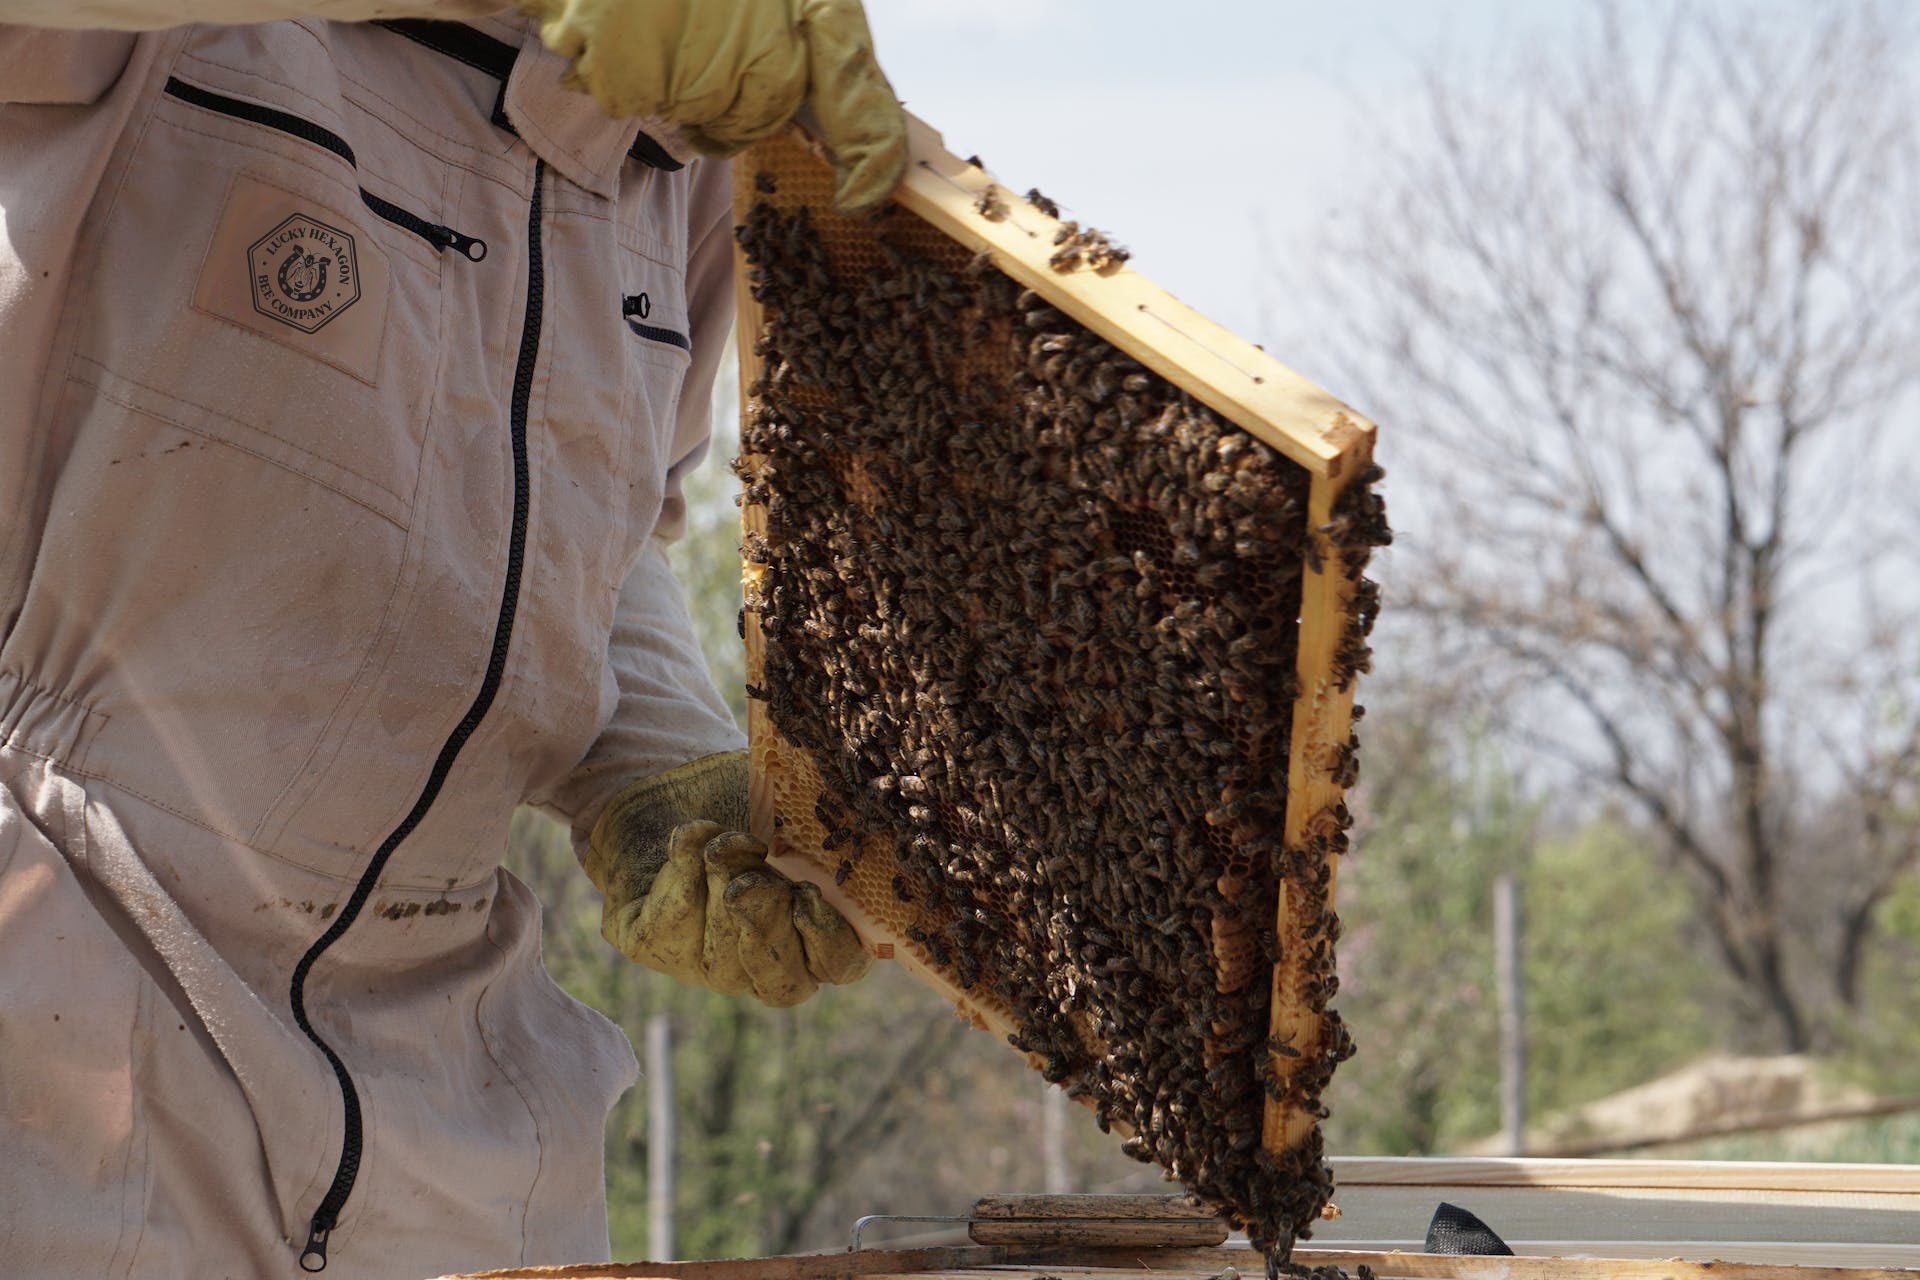 A bee keeper wearing a patch with the Lucky Hexagon logo on the suit.